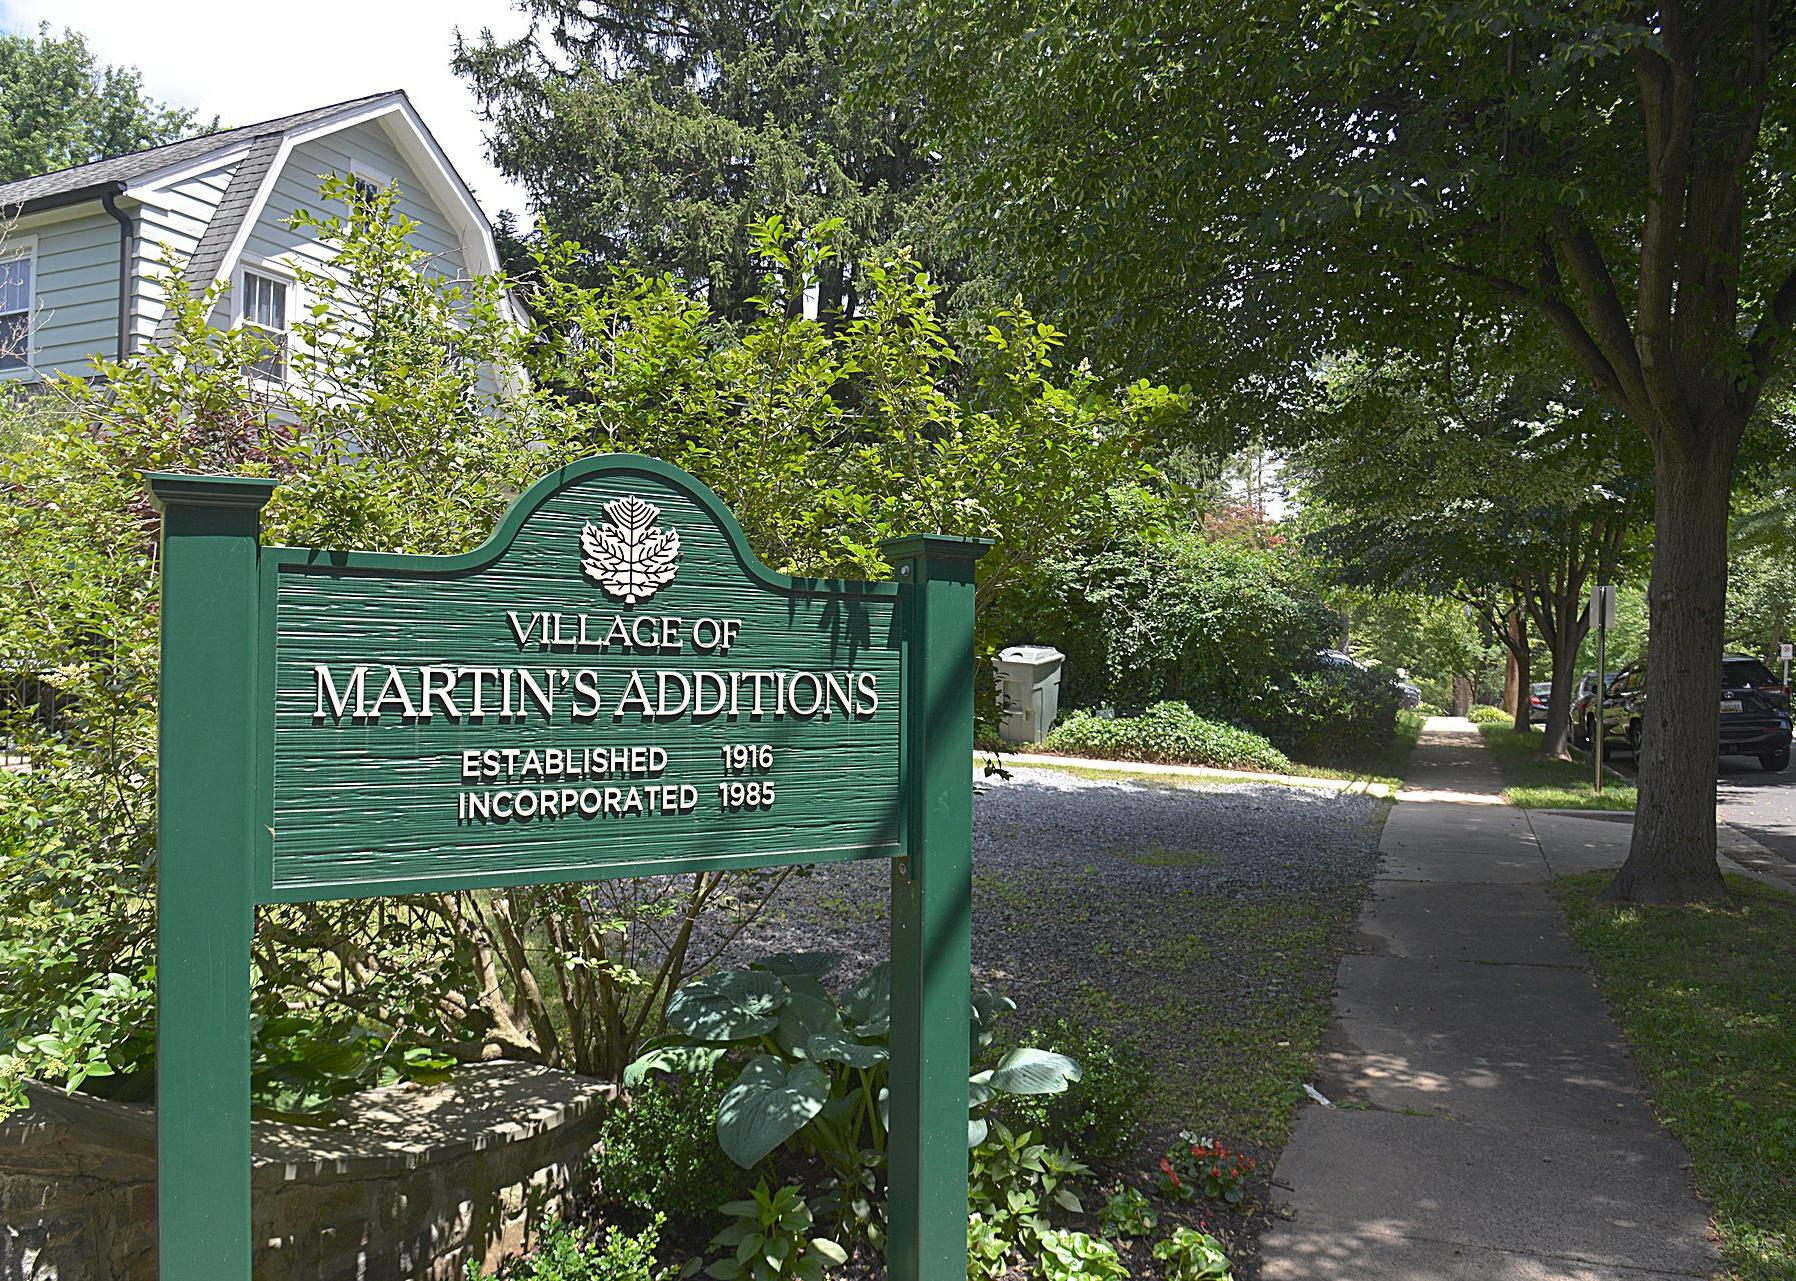 A green sign for Martin's Additions in a neighborhood.